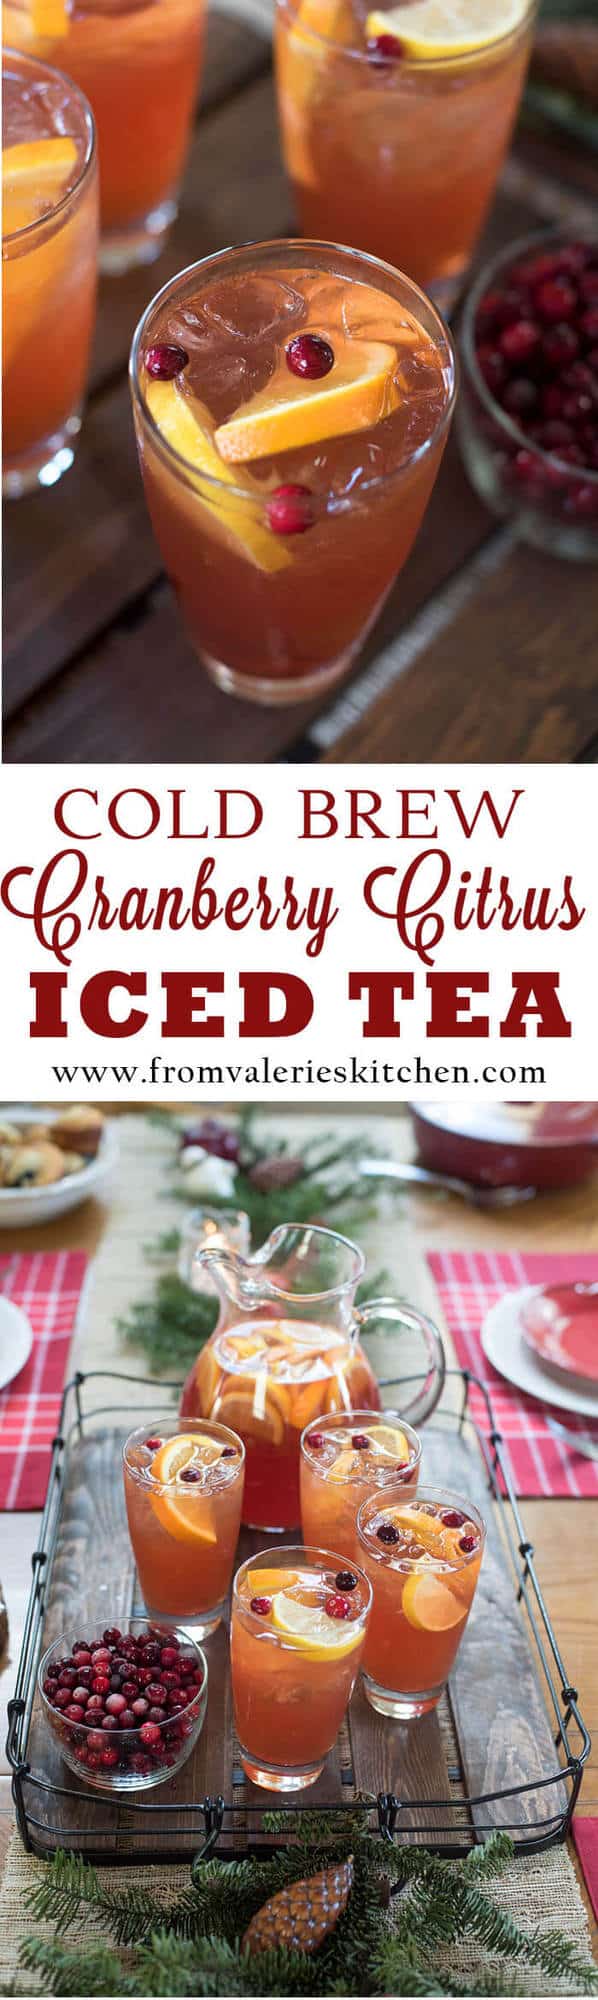 A fast, easy cold brew method creates this vibrant winter-inspired beverage. Brighten up your next winter meal with Cold Brew Cranberry Citrus Iced Tea. 